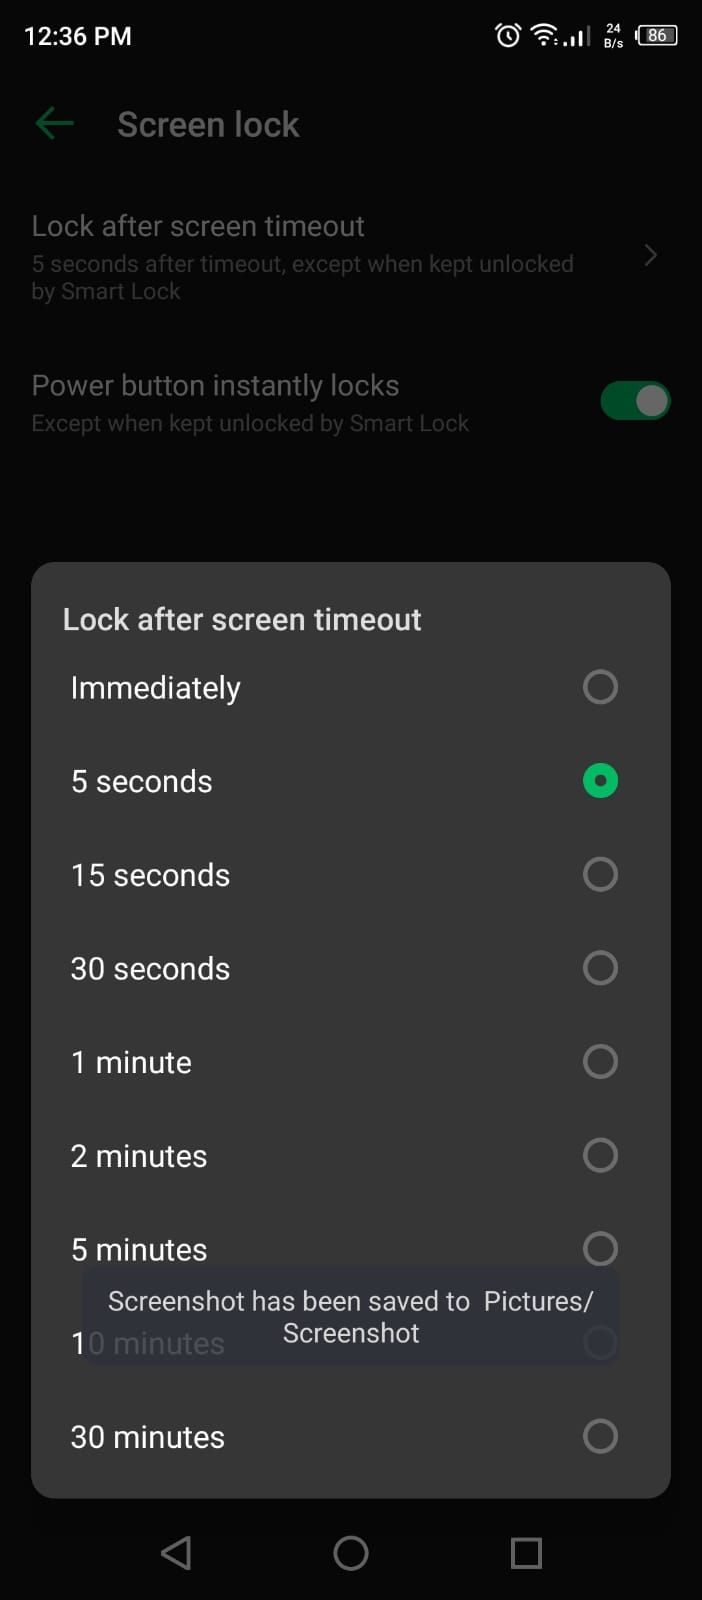 Setting Lock after Screen Timeout Time in Android Settings